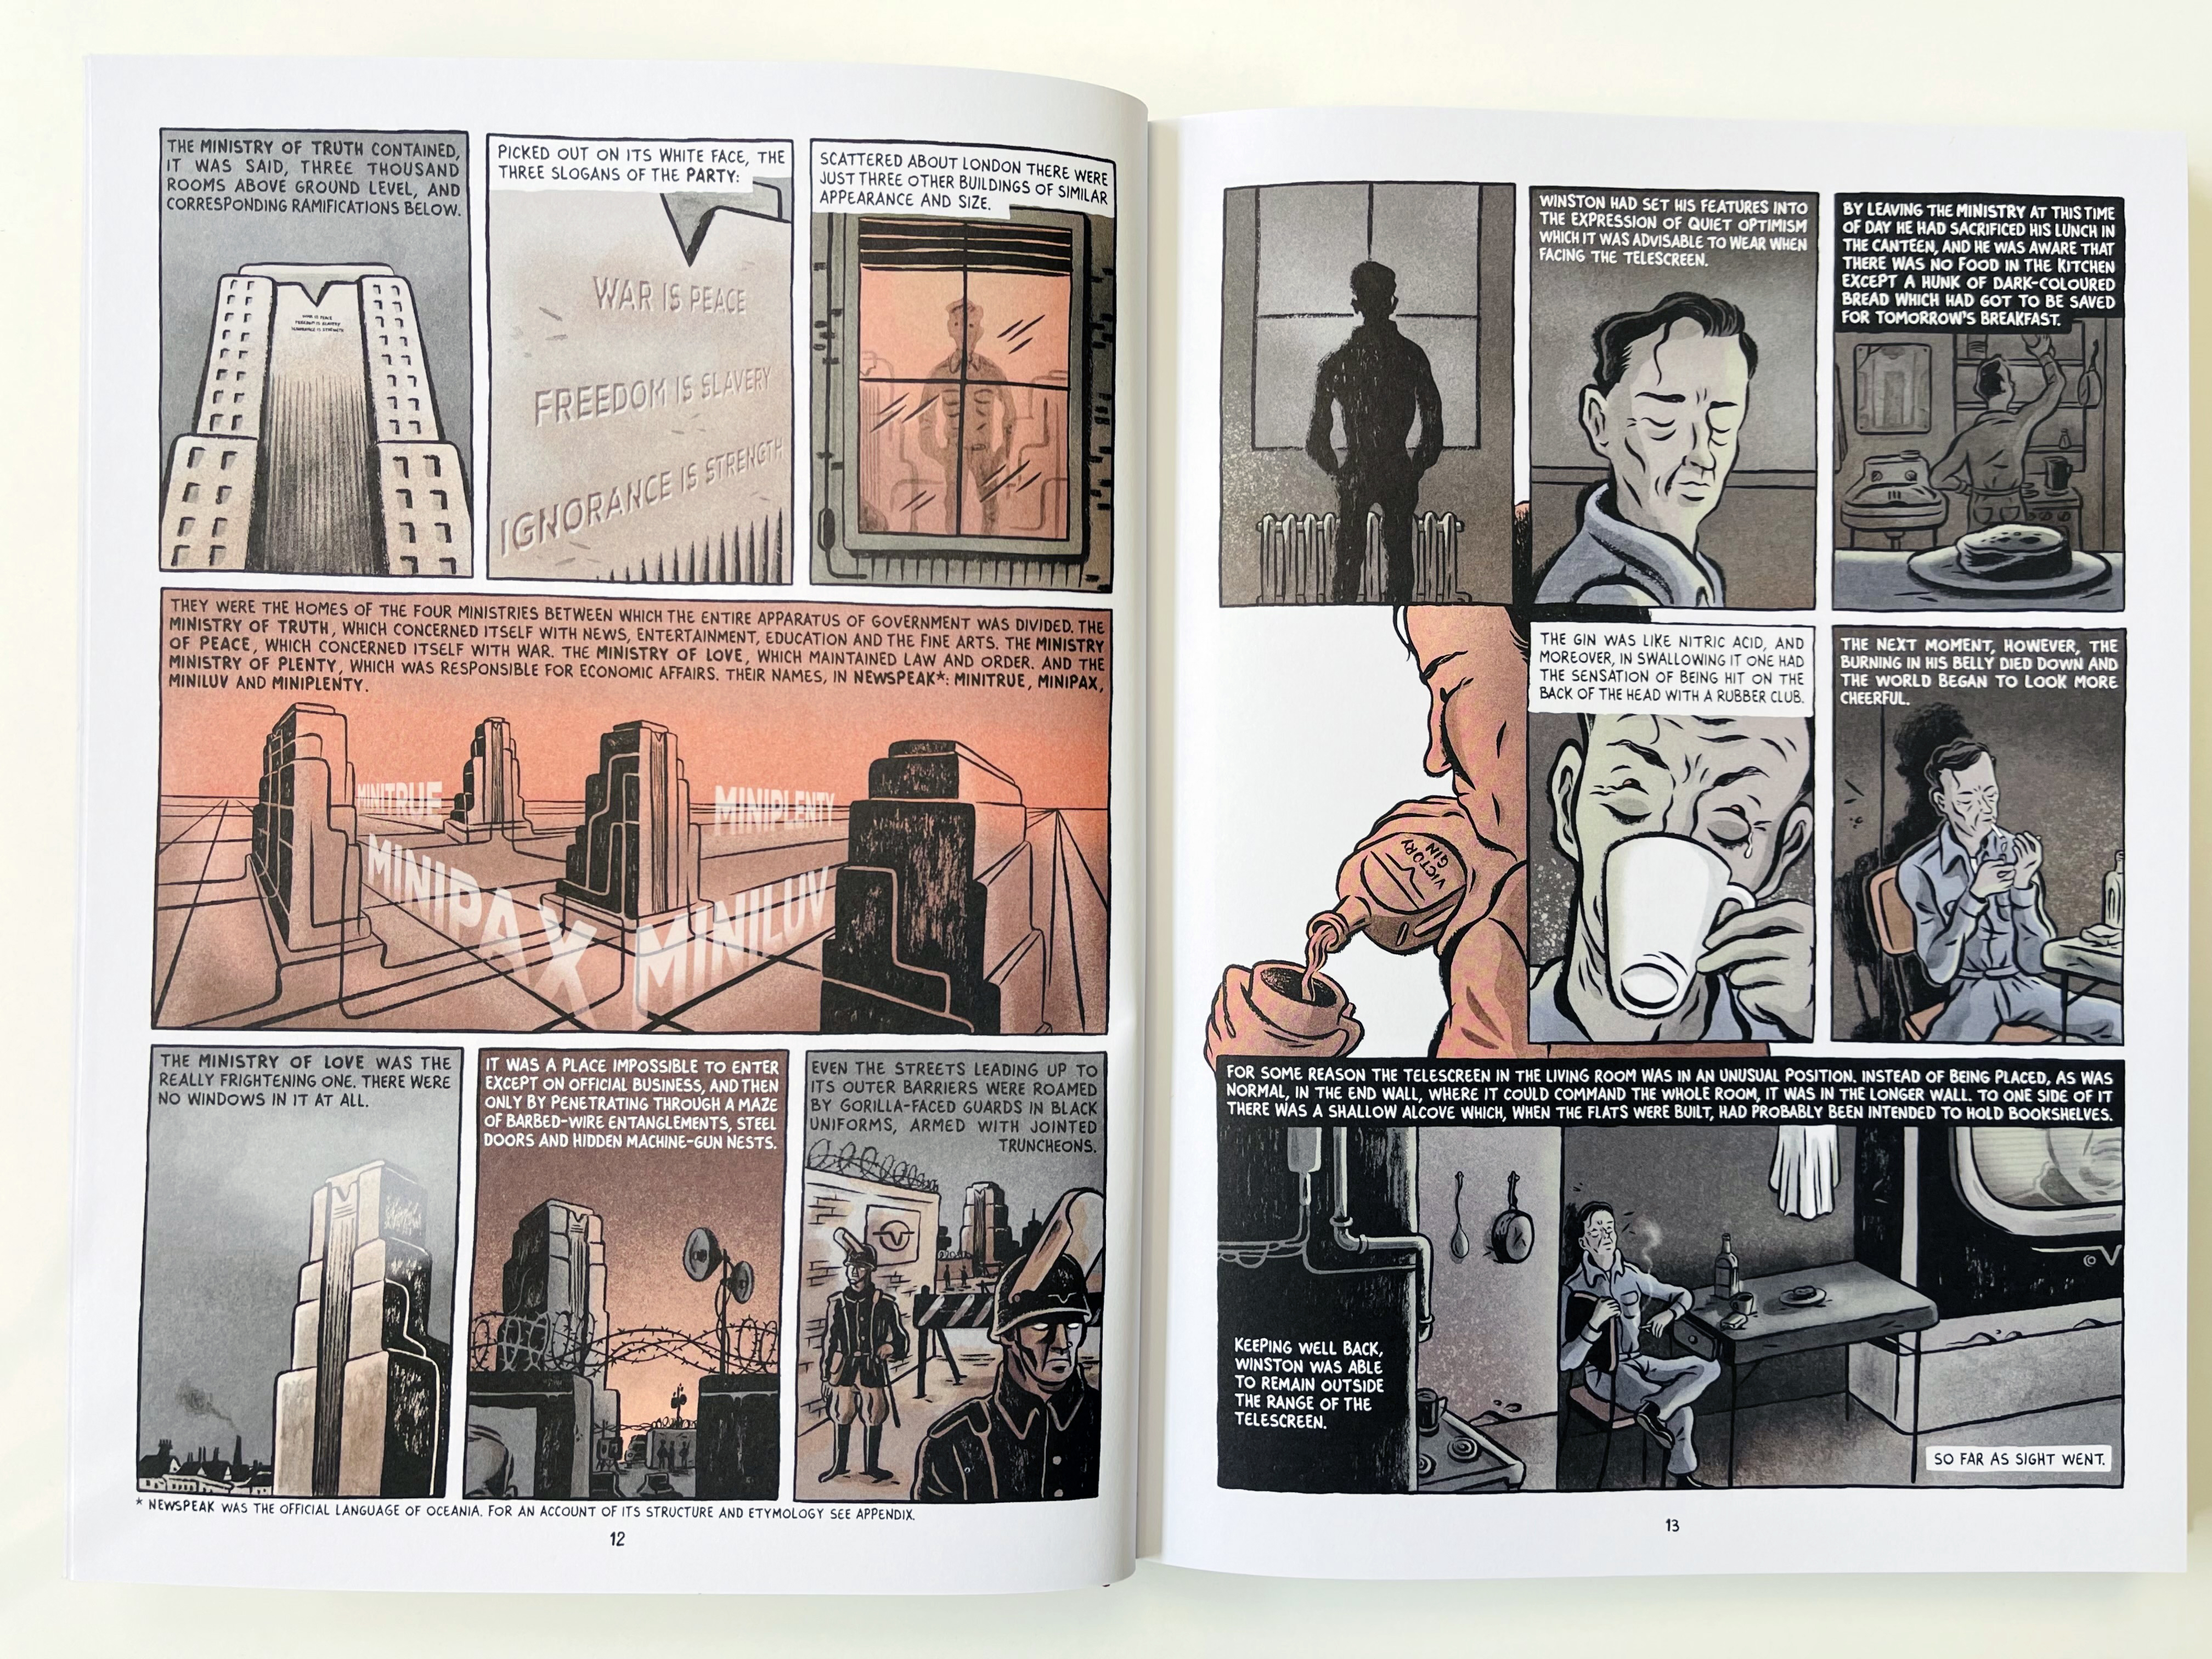 Nineteen Eighty-Four : The Graphic Novel